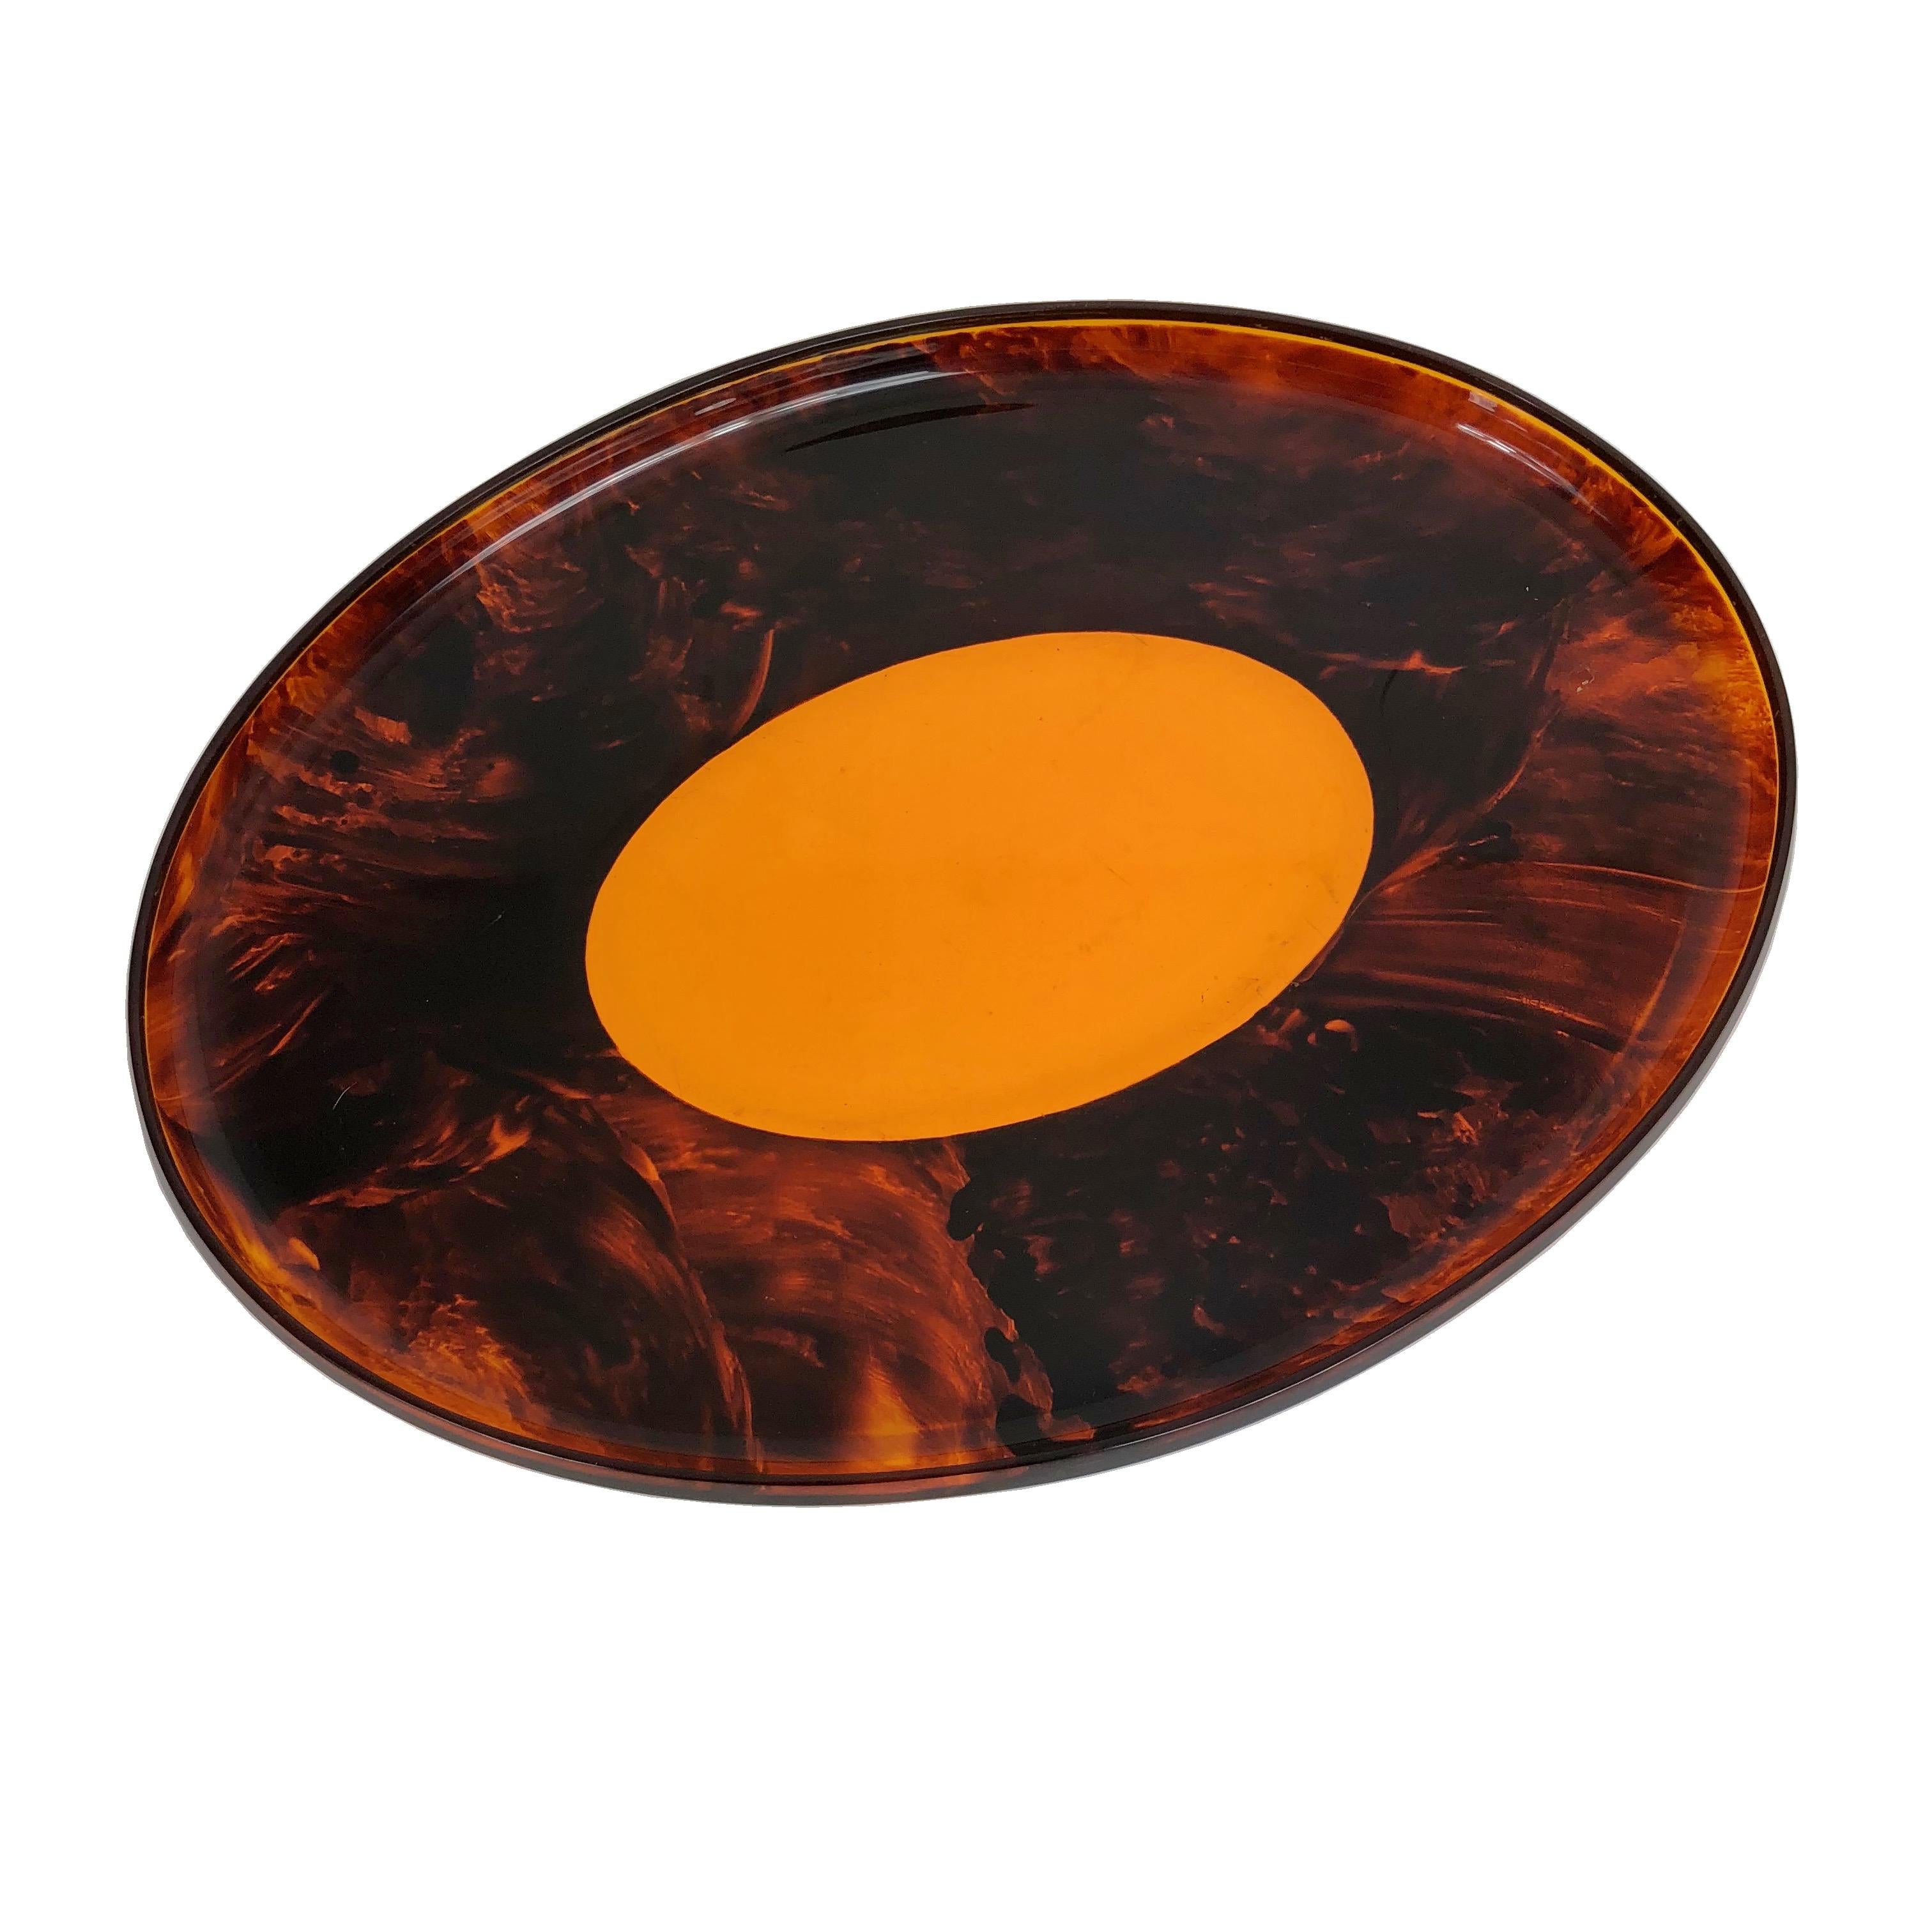 Splendid oval serving tray / centerpiece in faux tortoiseshell, Italy, circa 1970.